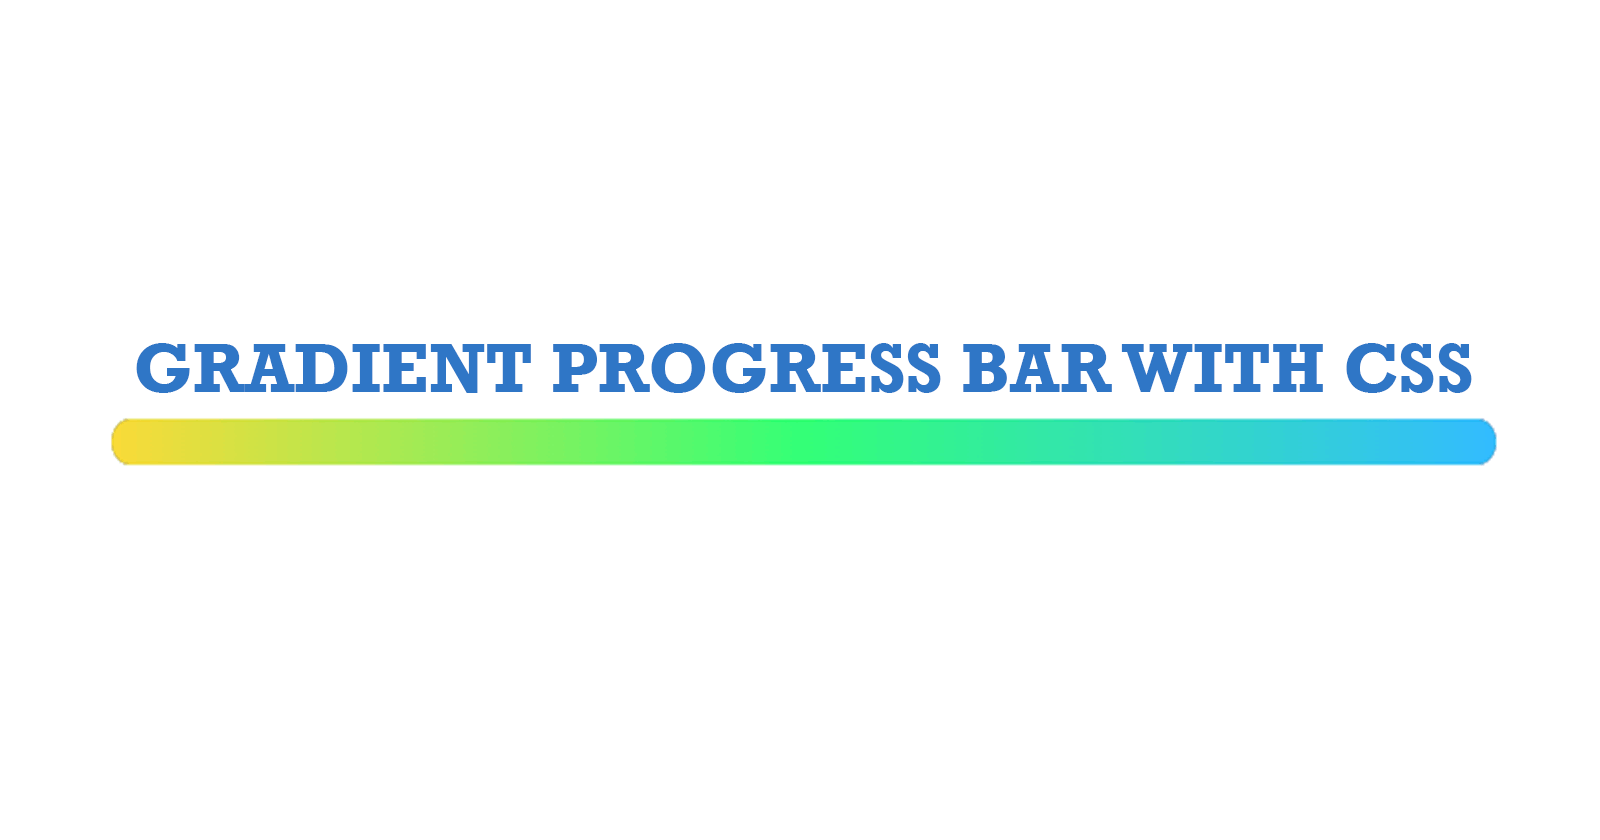 Create a gradient progress bar with CSS